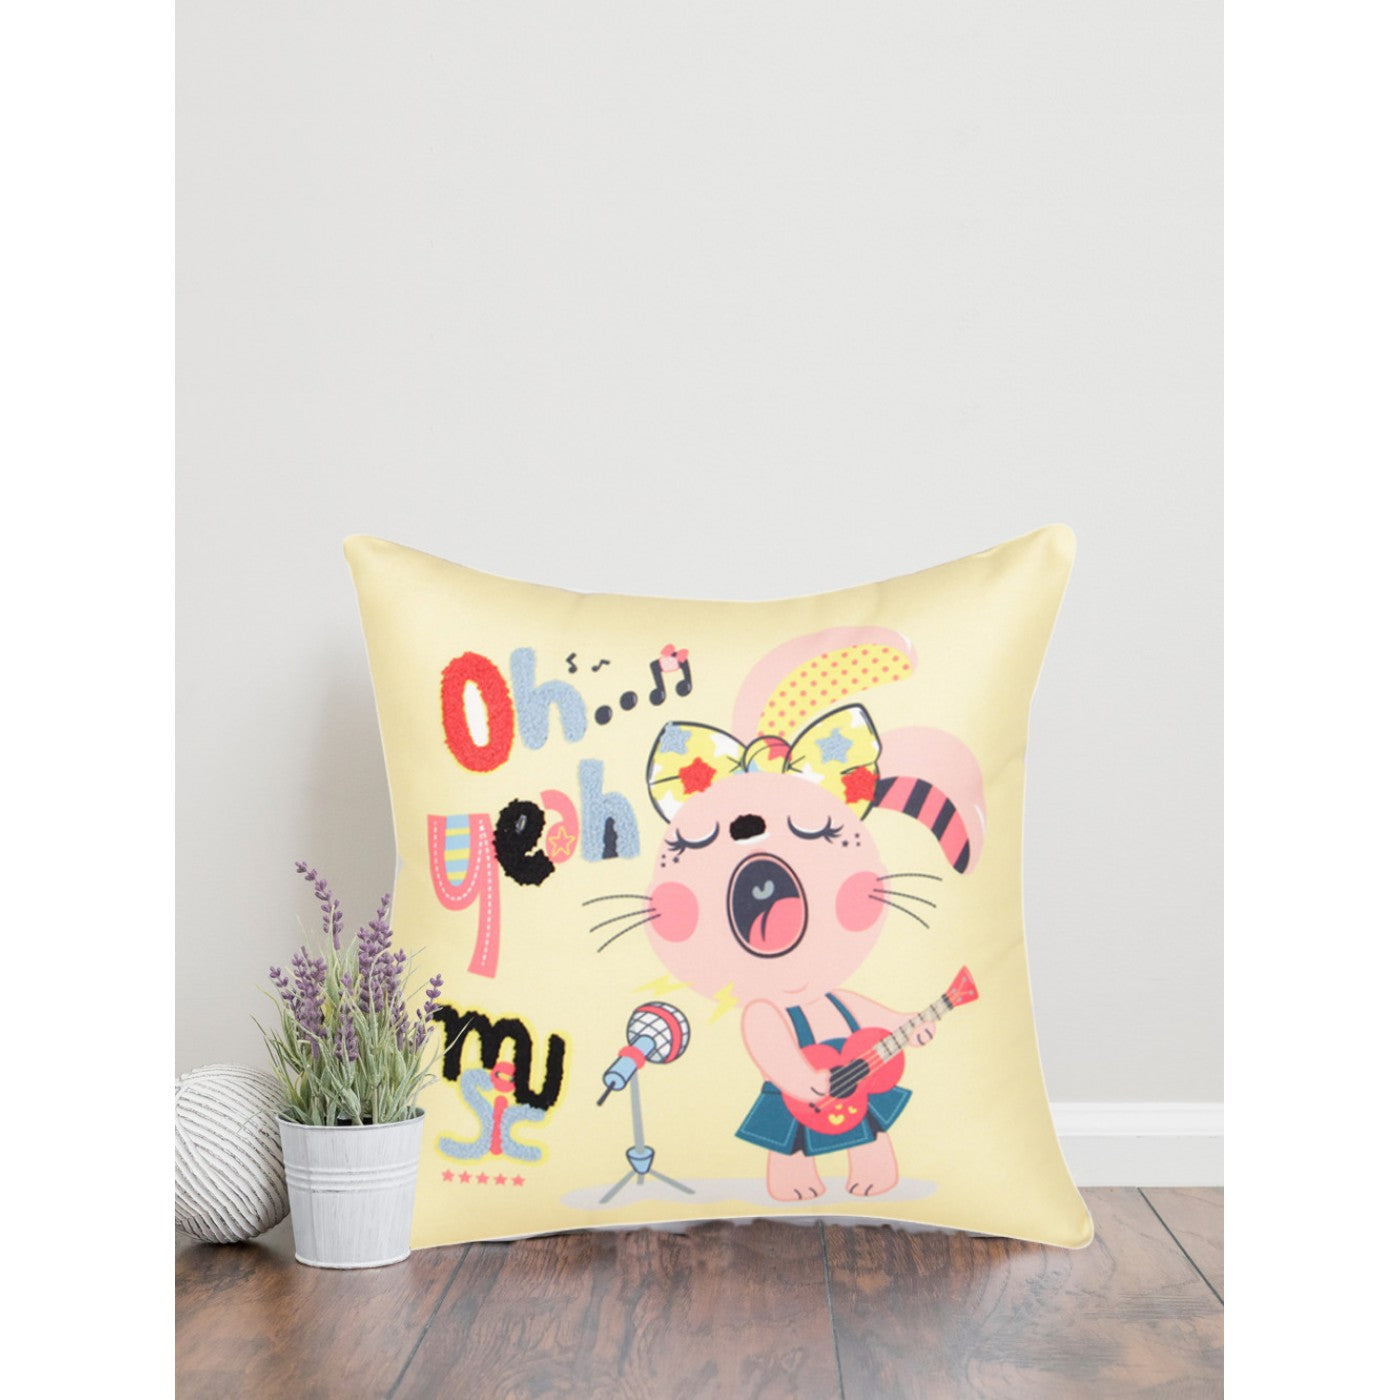 Oh Yeah! Vibrant Music-Themed Cushion Cover